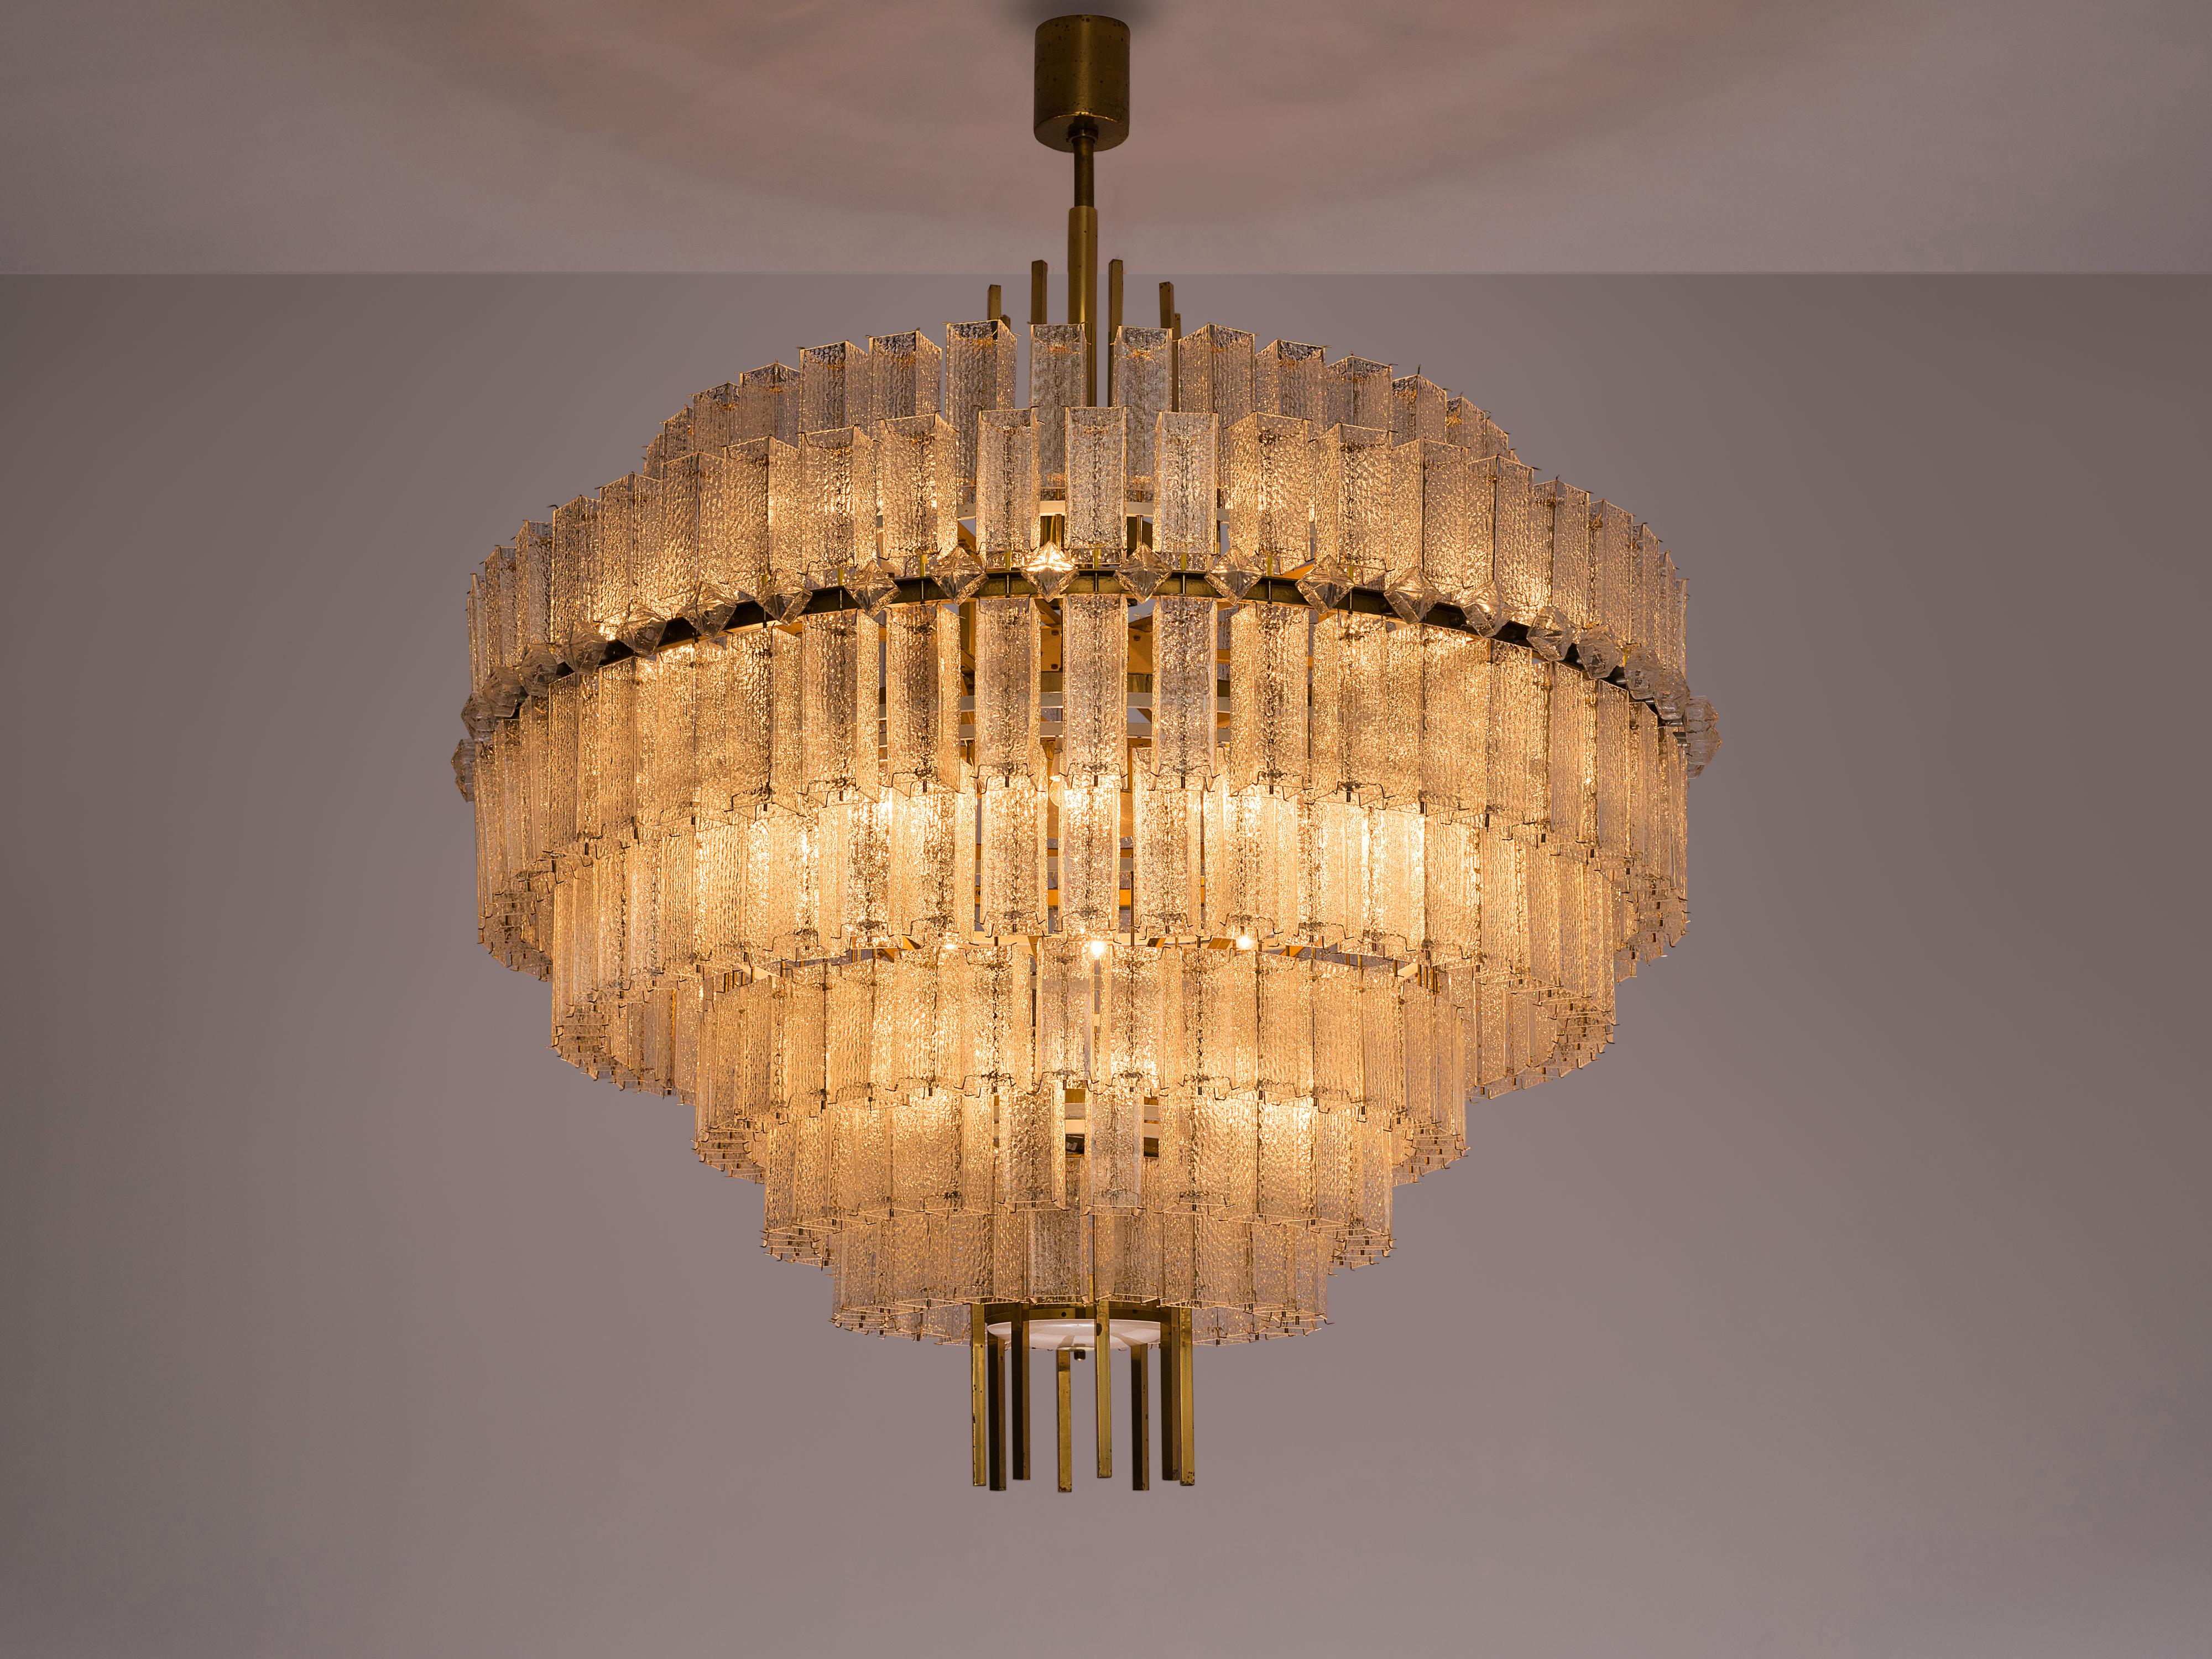 Large chandelier, glass, brass, Europe, 1970s.

Impressive and monumental chandelier made in Europe in the 1970s. This very large circular chandelier has a diameter of 200 cm/6.5 ft, and it displays seven layers of elegant glass shades in a